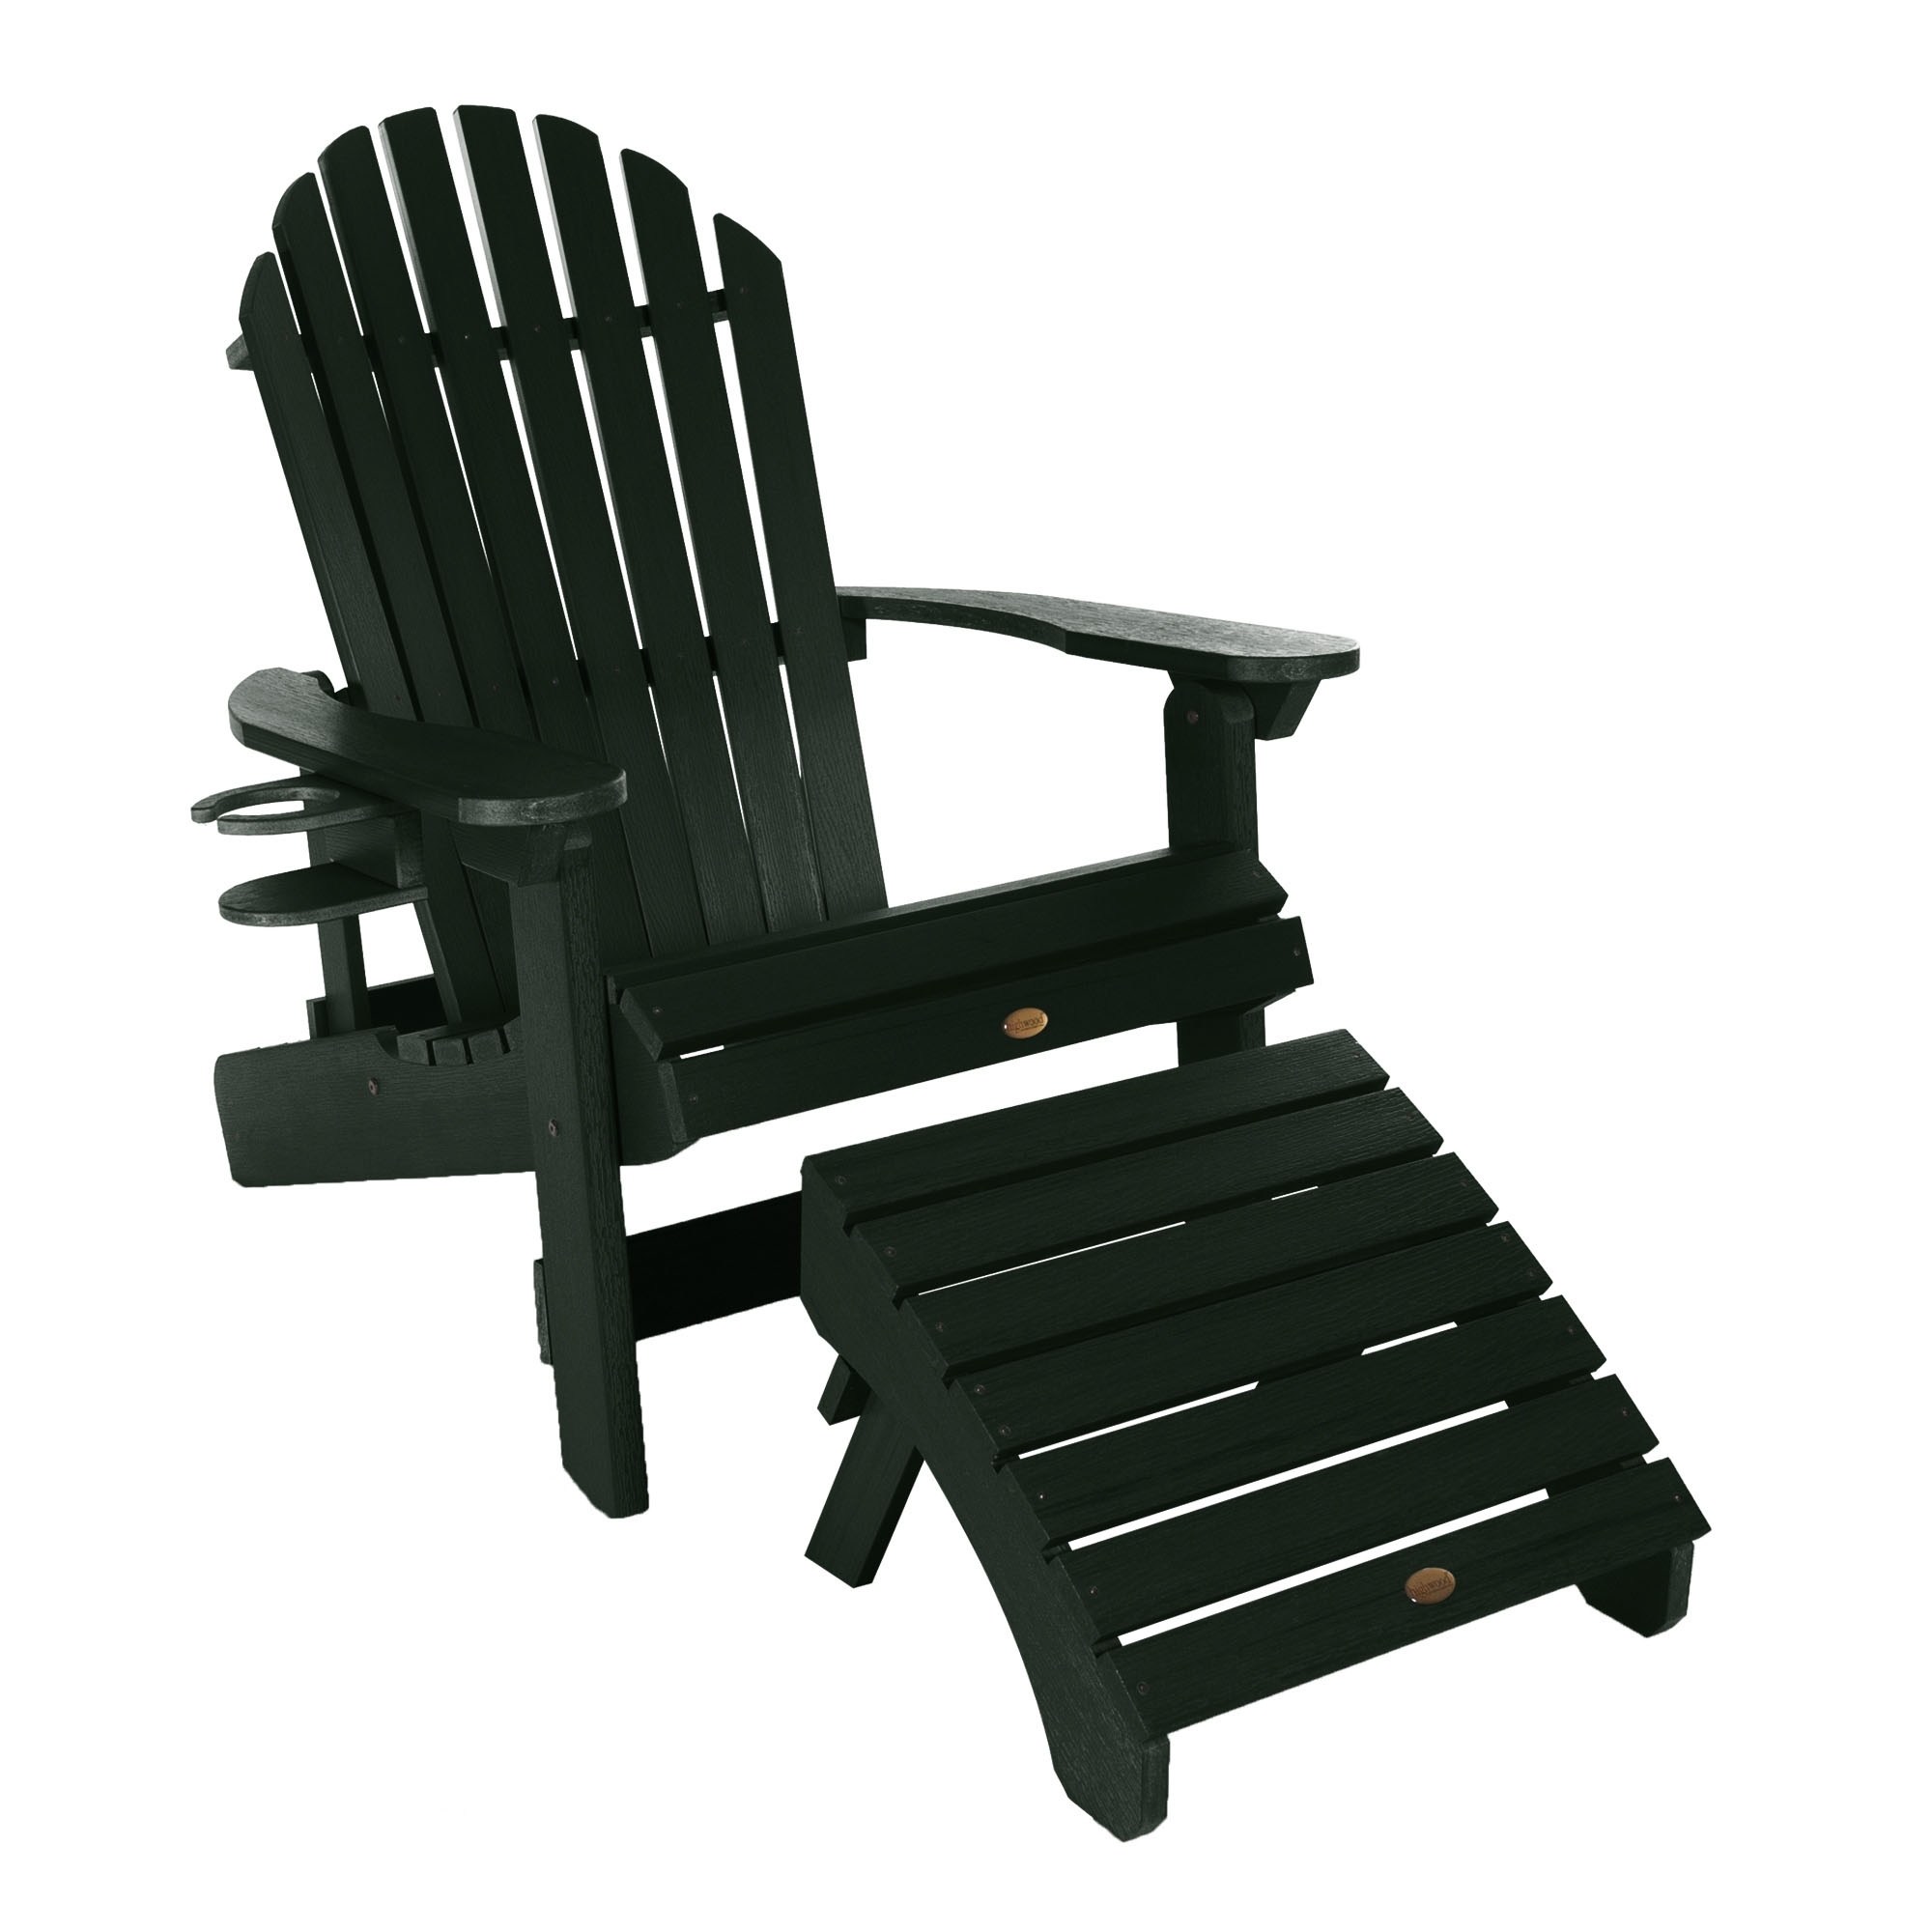 1 King Hamilton Folding & Reclining Adirondack Chair with 1 Folding Ottoman and 1 Cupholder - image 1 of 6